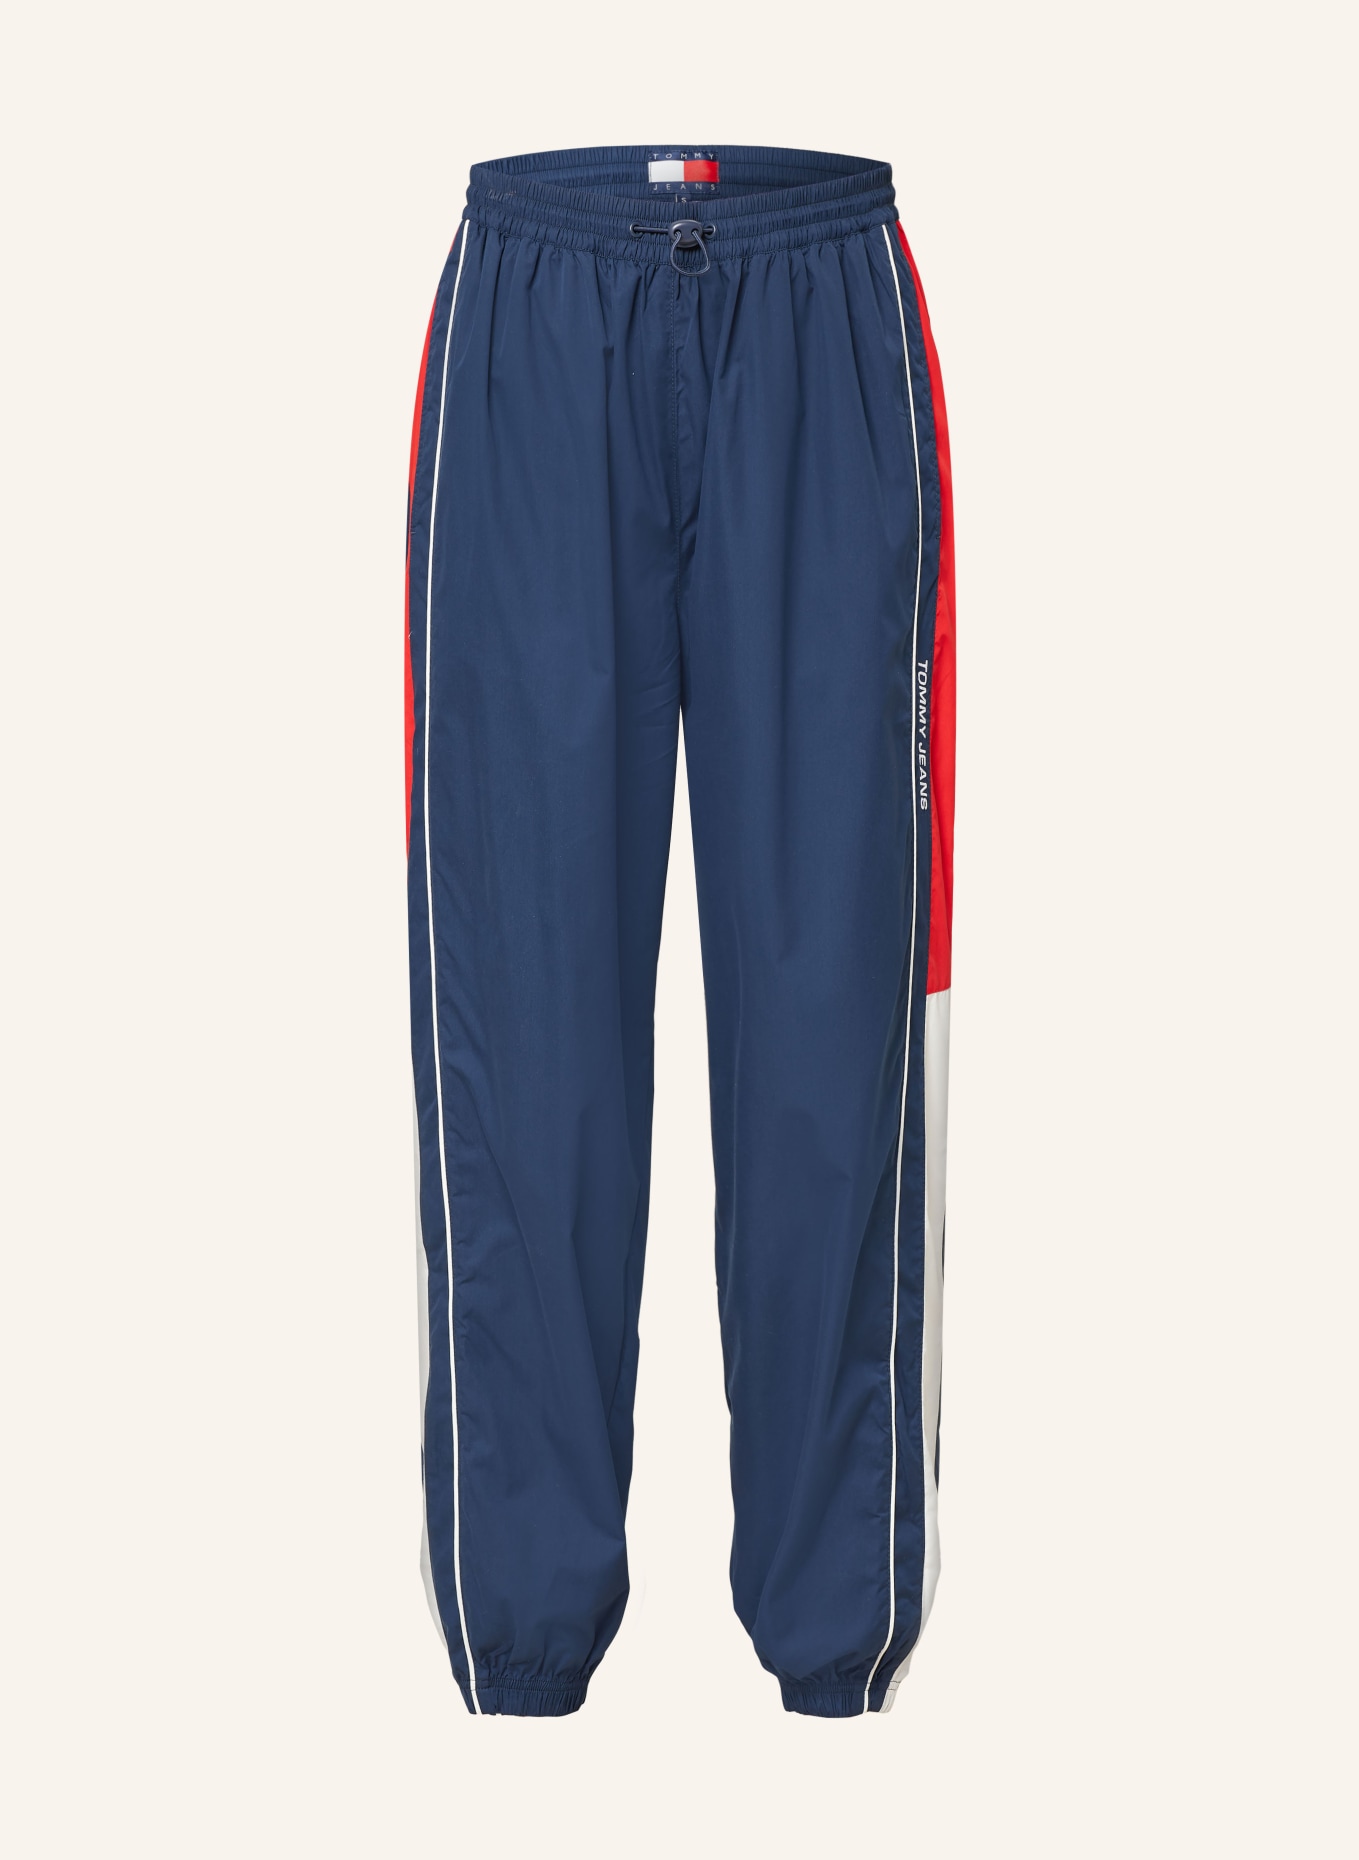 TOMMY JEANS Track Pants, Farbe: DUNKELBLAU/ ROT/ WEISS (Bild 1)